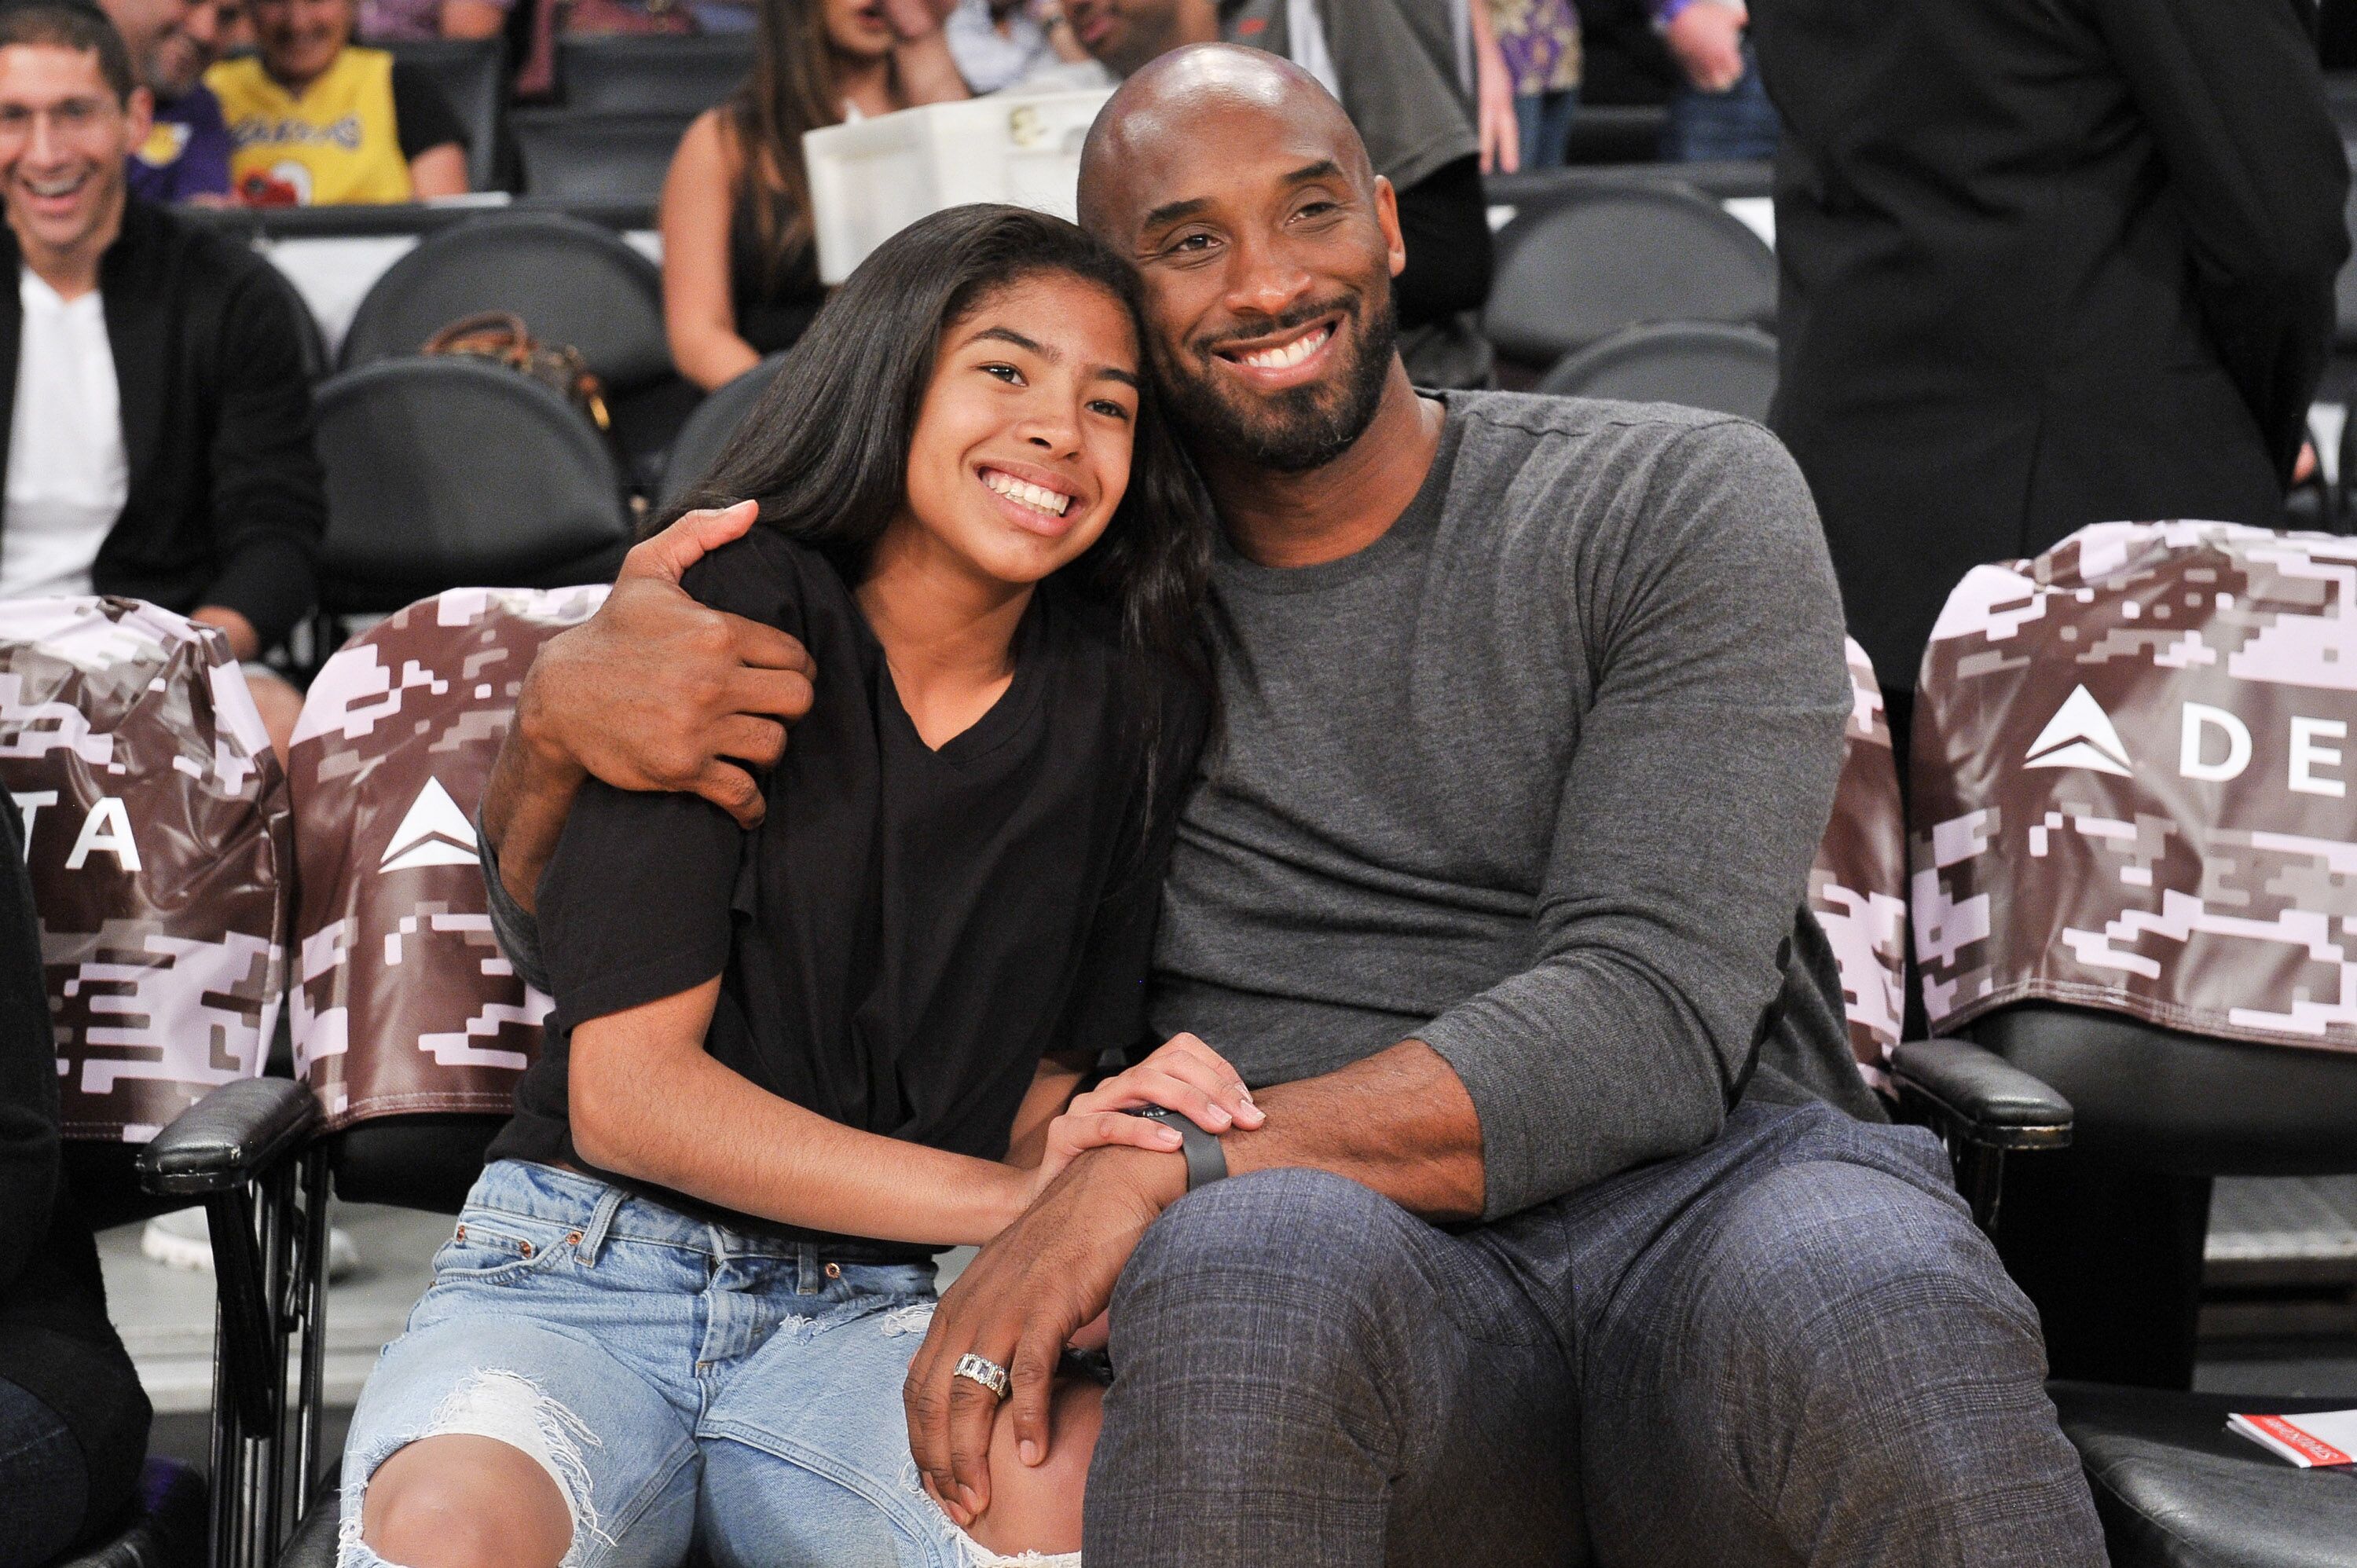 Kobe and Gianna Bryant at a basketball game between the Los Angeles Lakers and the Atlanta Hawks at Staples Center in Los Angeles, California | Photo: Allen Berezovsky/Getty Images